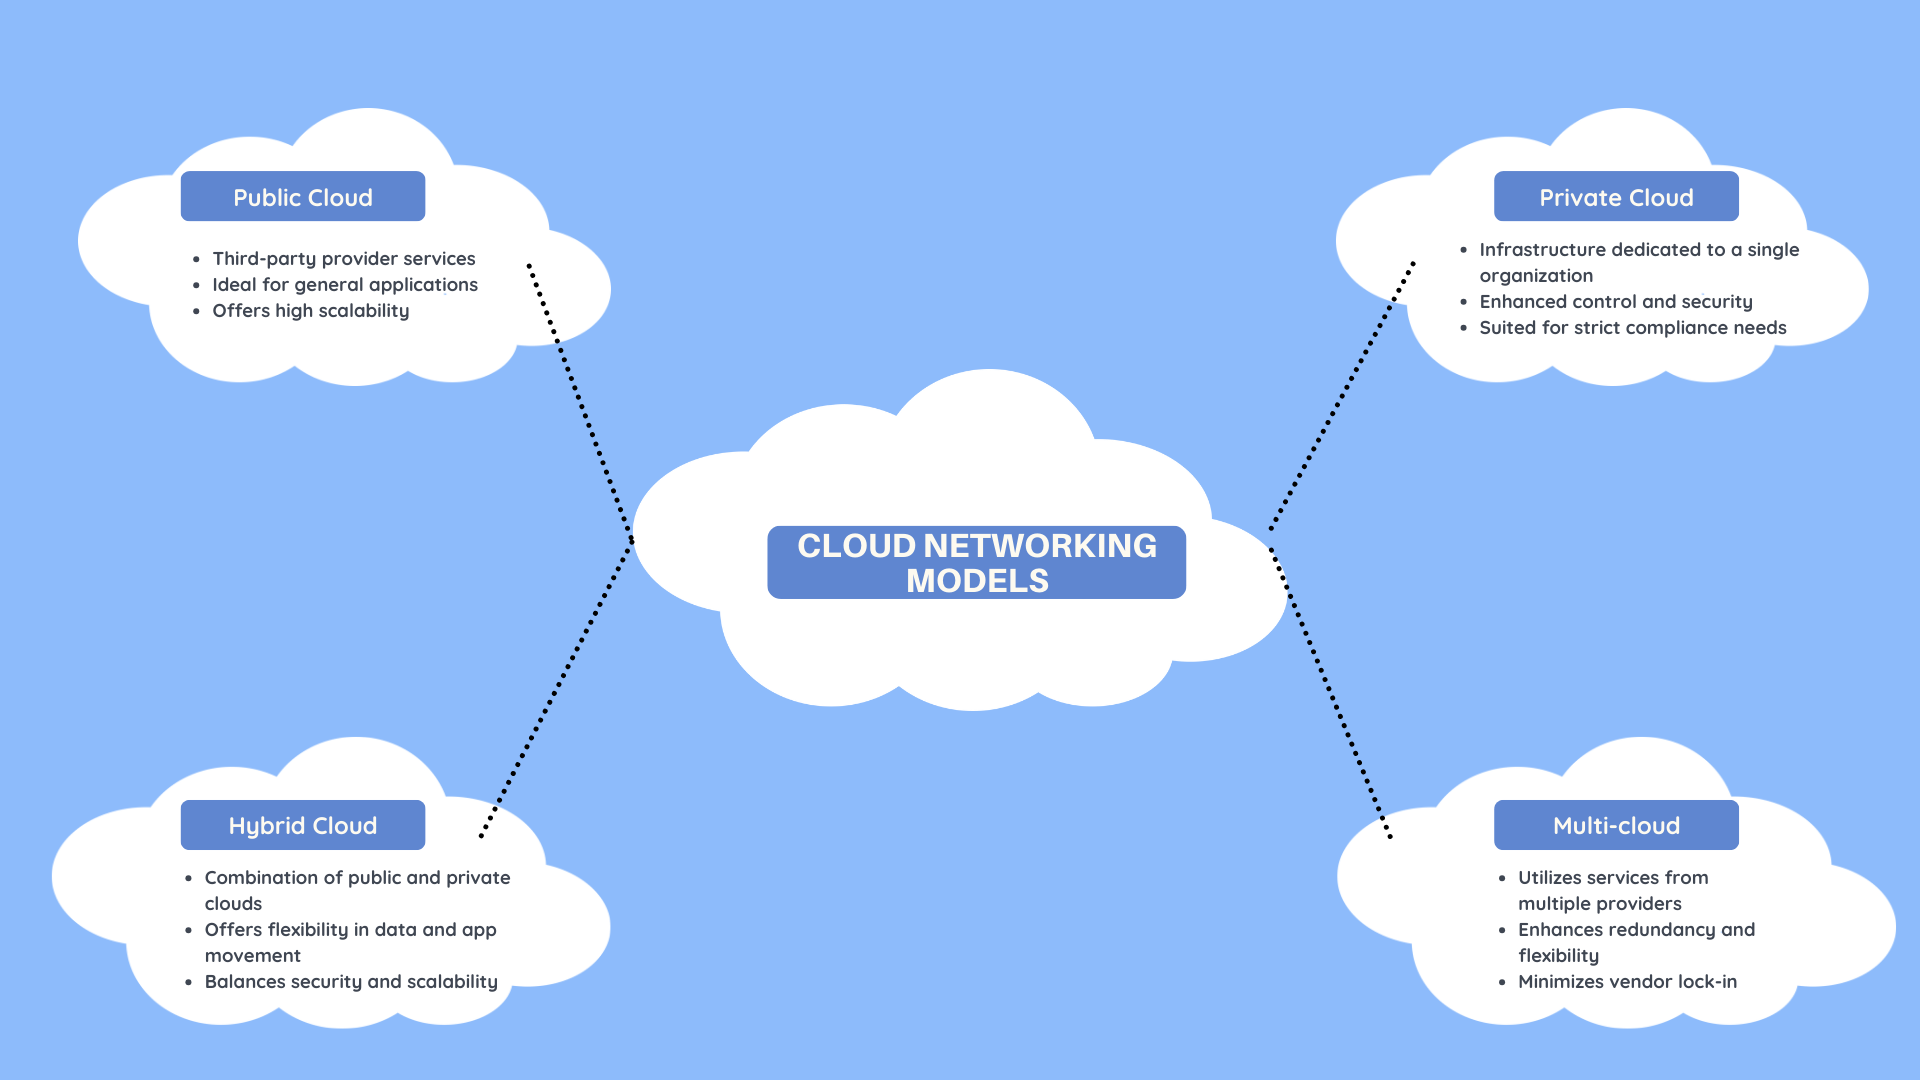 An illustration of different types of cloud networking models